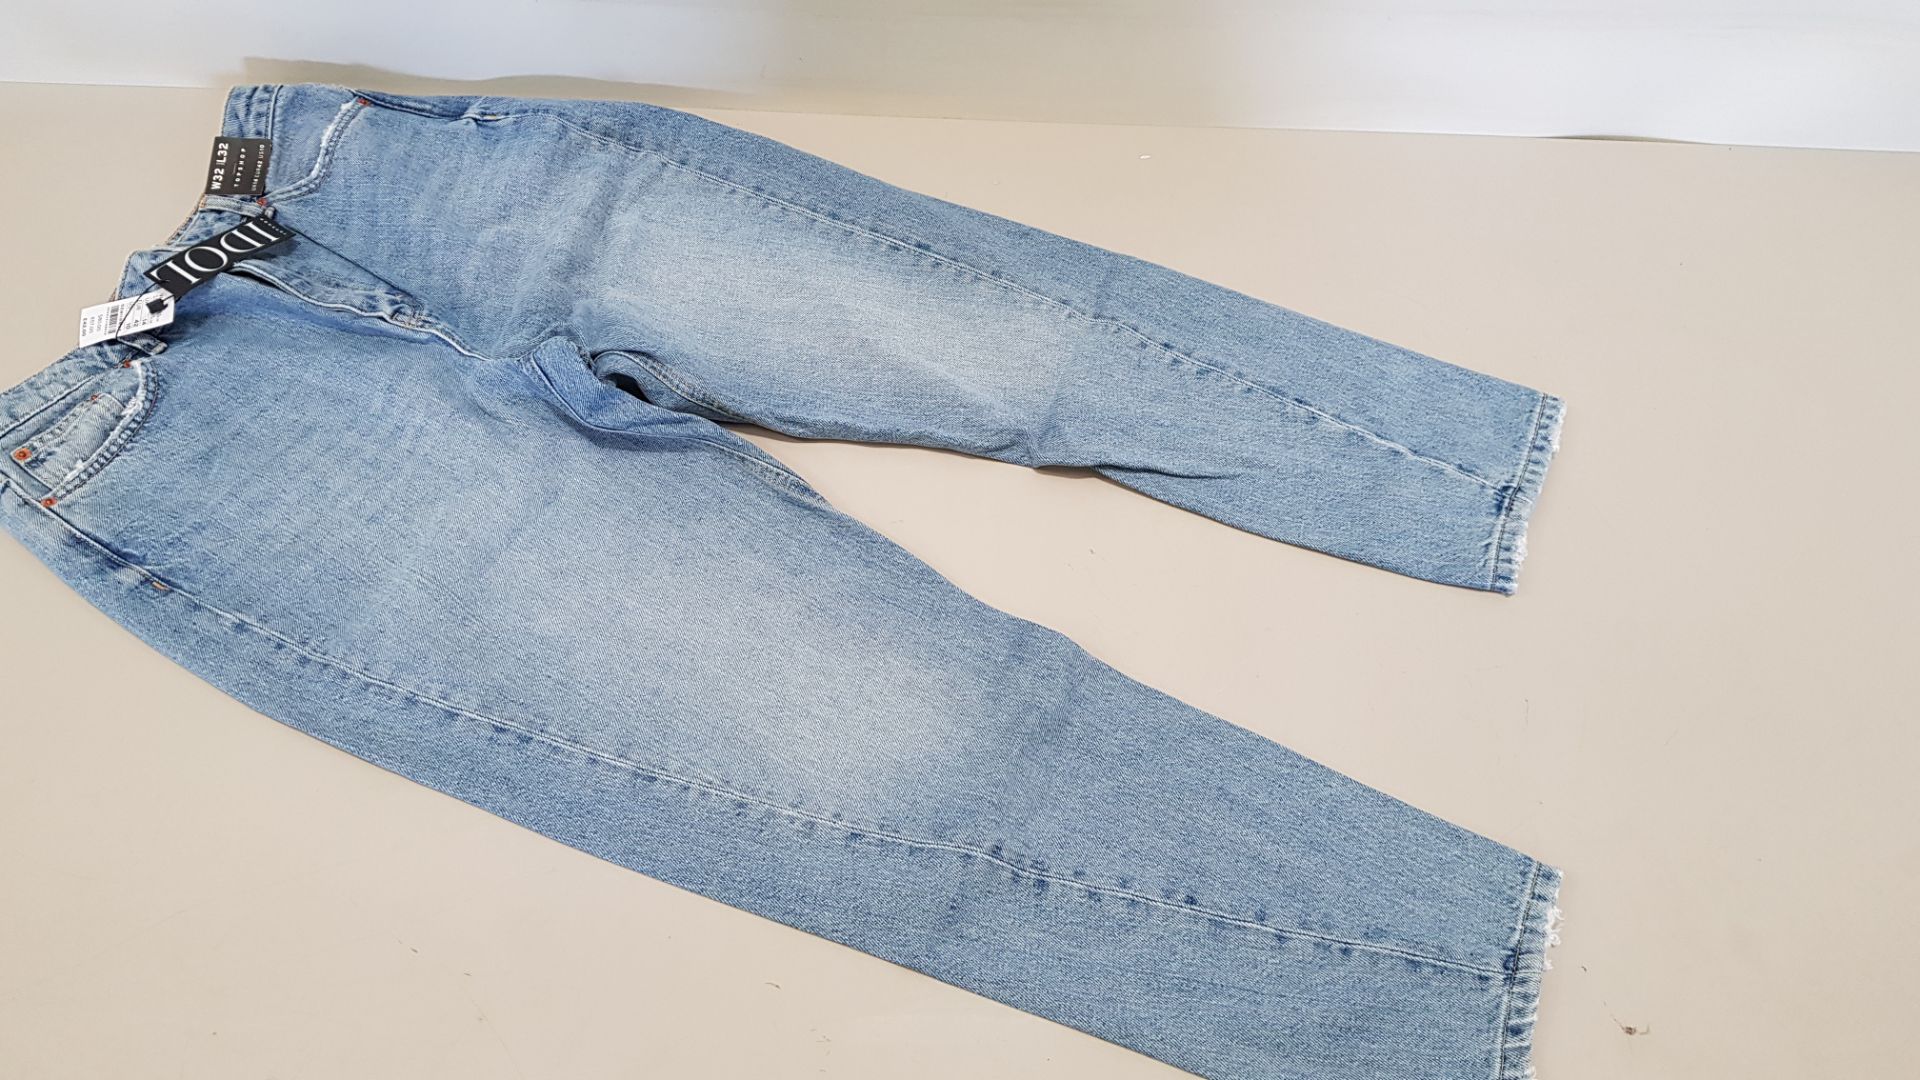 13 X BRAND NEW TOPSHOP IDOL JEANS UK SIZE 10 AND 14 RRP £42.00 (TOTAL RRP £546.00)